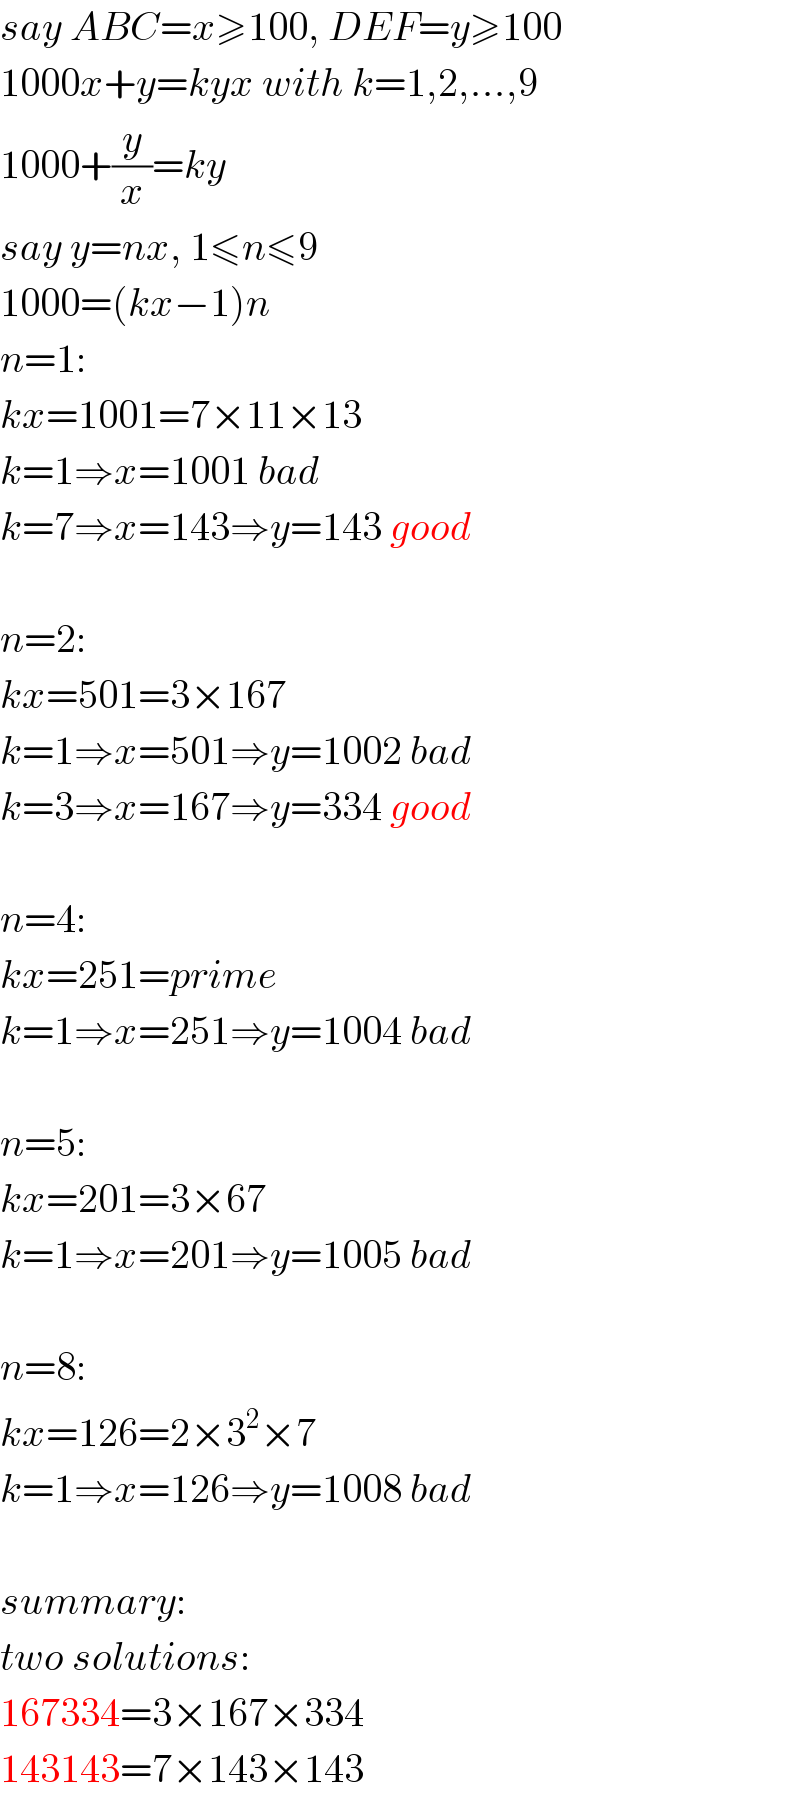 say ABC=x≥100, DEF=y≥100  1000x+y=kyx with k=1,2,...,9  1000+(y/x)=ky  say y=nx, 1≤n≤9  1000=(kx−1)n  n=1:  kx=1001=7×11×13  k=1⇒x=1001 bad  k=7⇒x=143⇒y=143 good    n=2:  kx=501=3×167  k=1⇒x=501⇒y=1002 bad  k=3⇒x=167⇒y=334 good    n=4:  kx=251=prime  k=1⇒x=251⇒y=1004 bad    n=5:  kx=201=3×67  k=1⇒x=201⇒y=1005 bad    n=8:  kx=126=2×3^2 ×7  k=1⇒x=126⇒y=1008 bad    summary:  two solutions:  167334=3×167×334  143143=7×143×143  